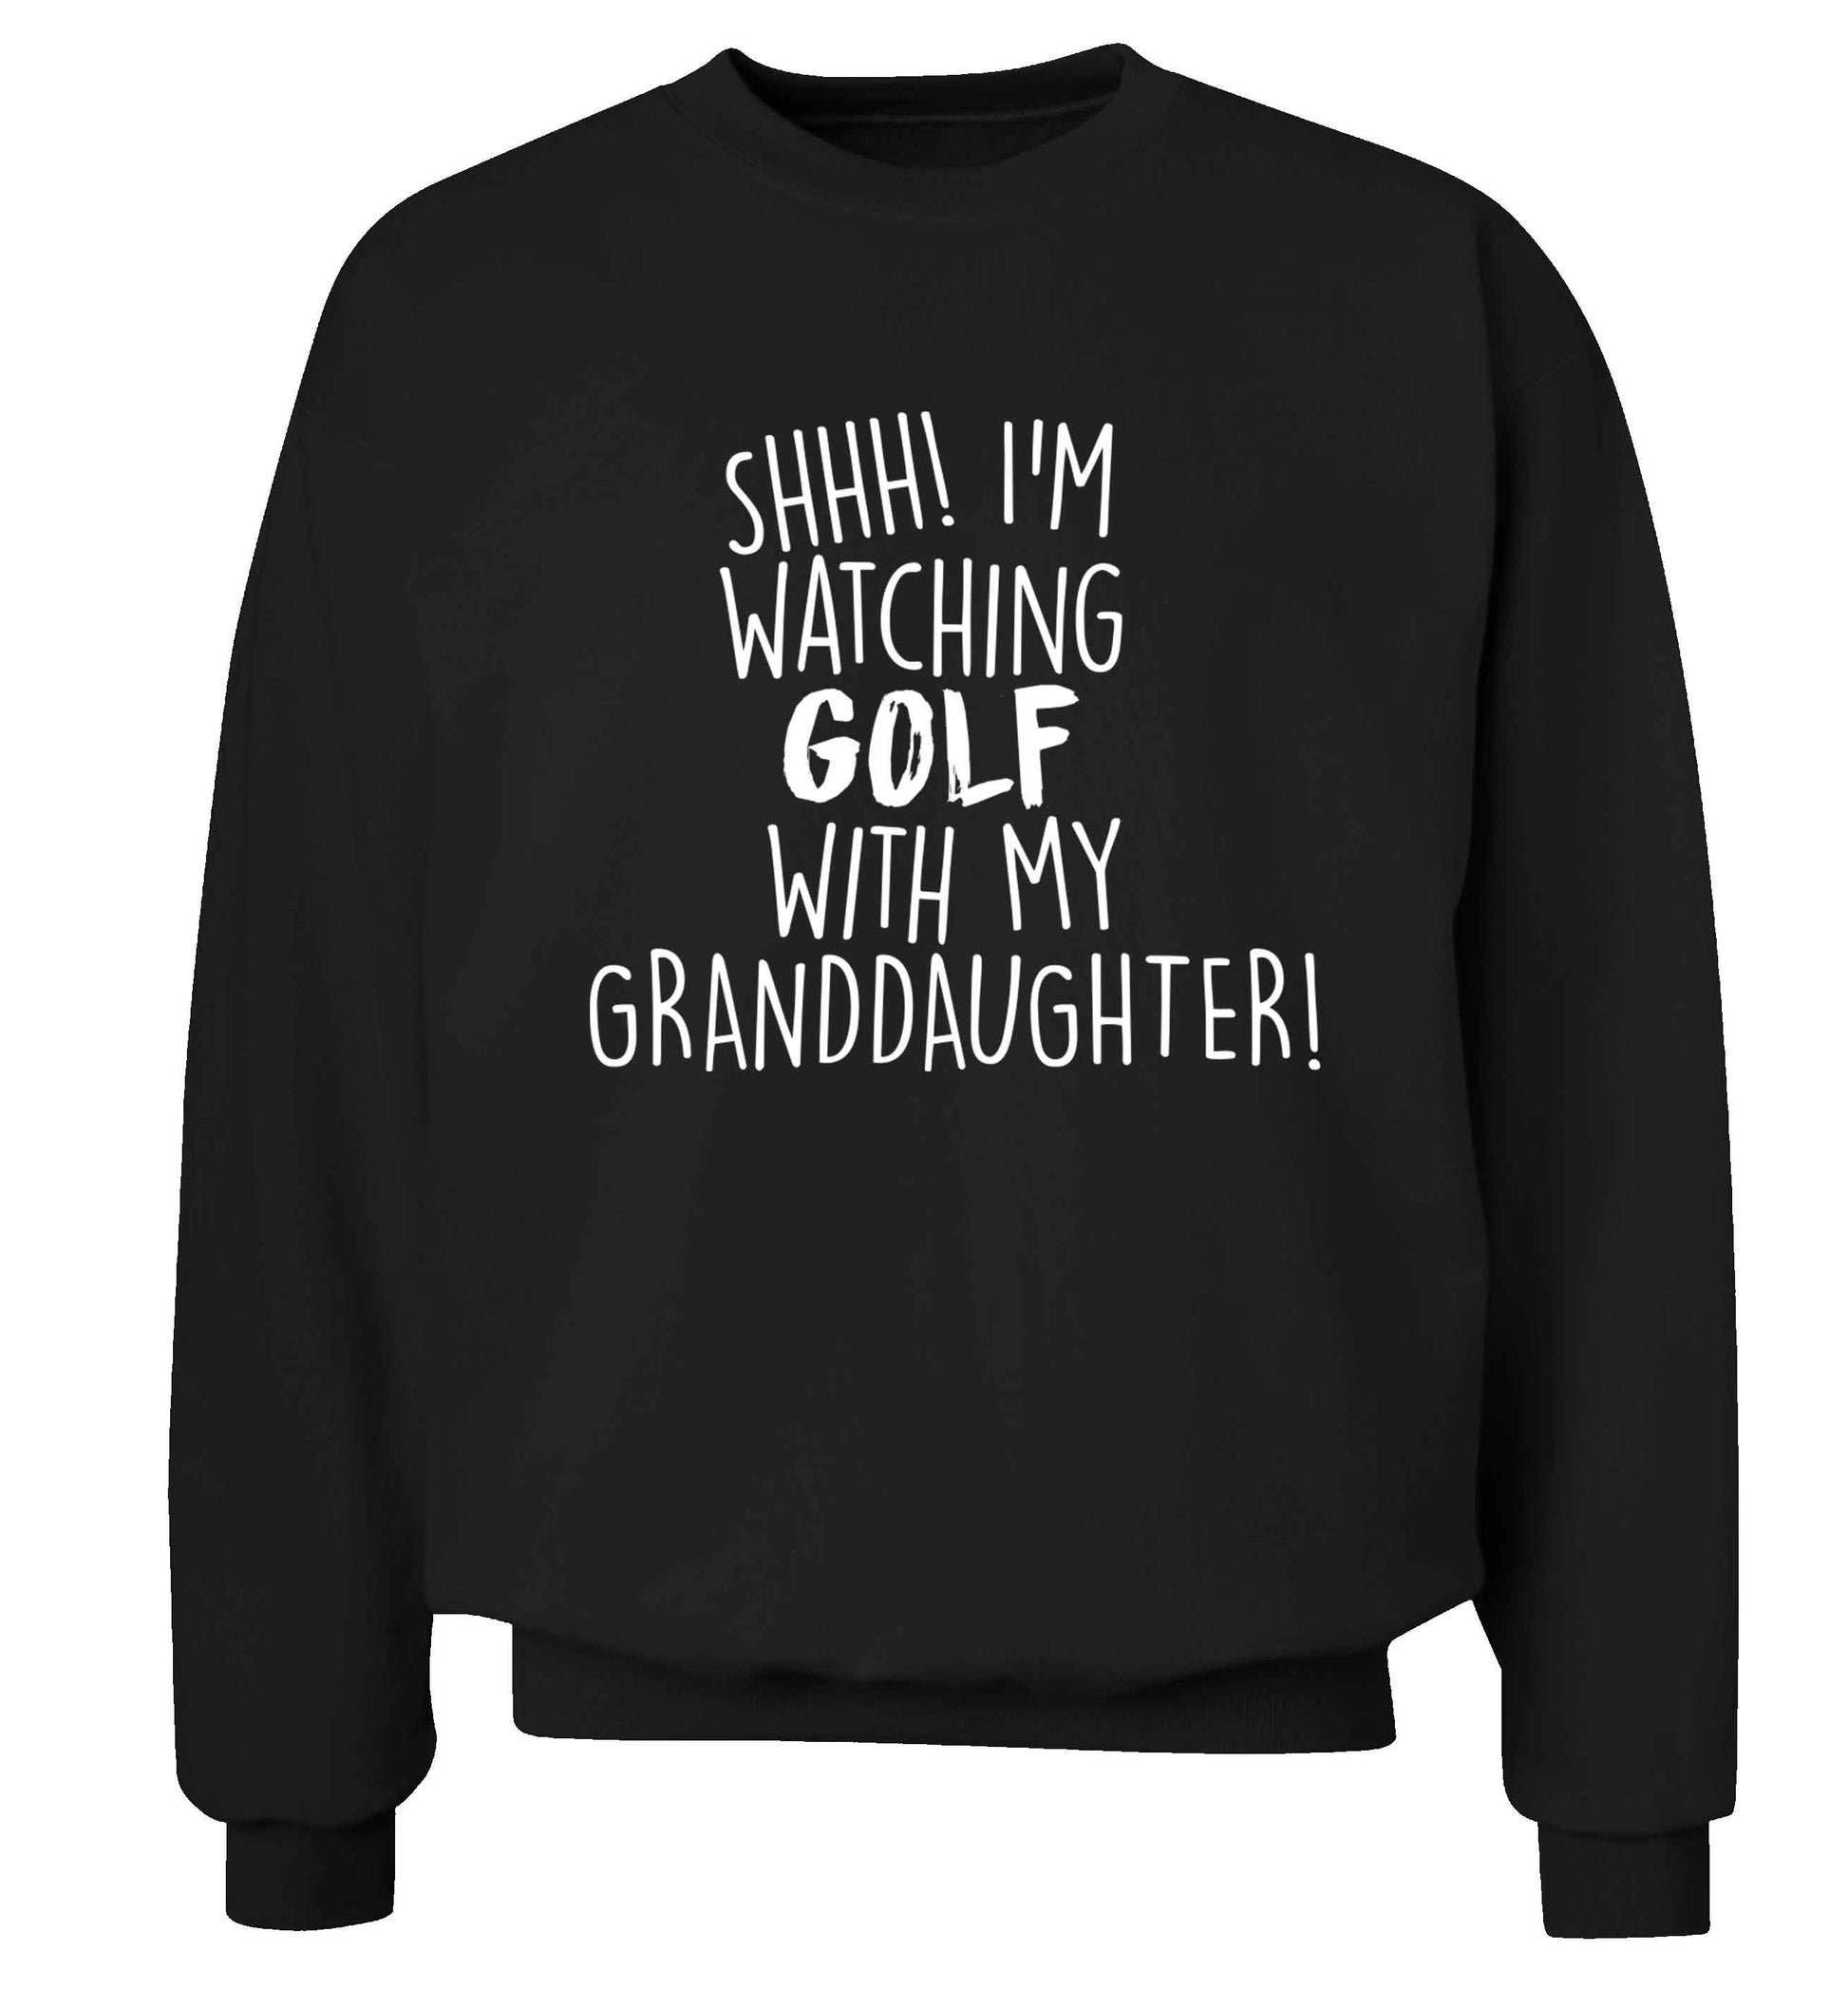 Shh I'm watching golf with my granddaughter Adult's unisex black Sweater 2XL